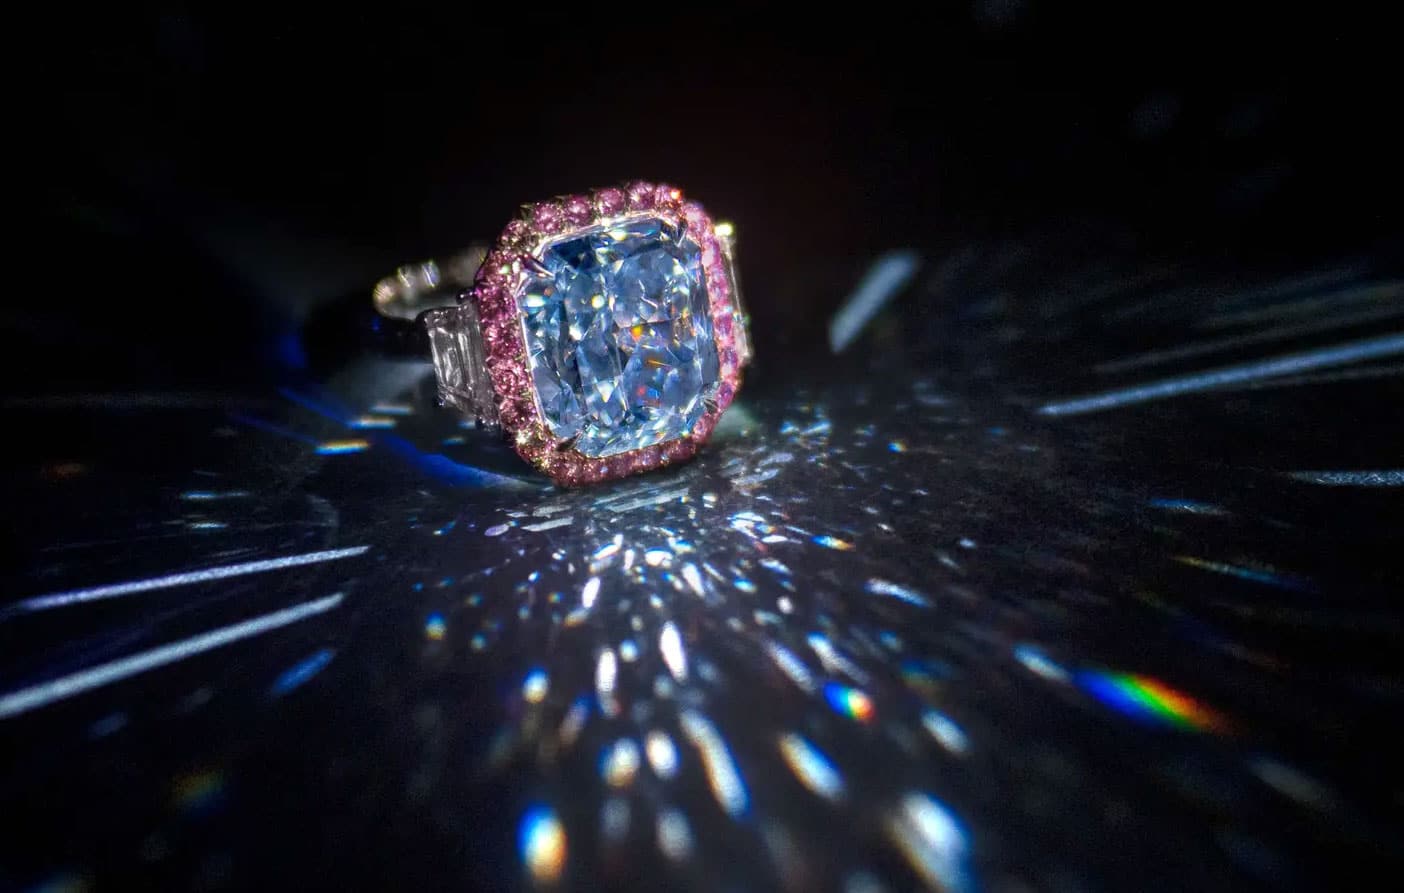 11.28 Carat 'Infinite Blue' Diamond Disappoints At The Sotheby's Hong Kong Jewelry Sale